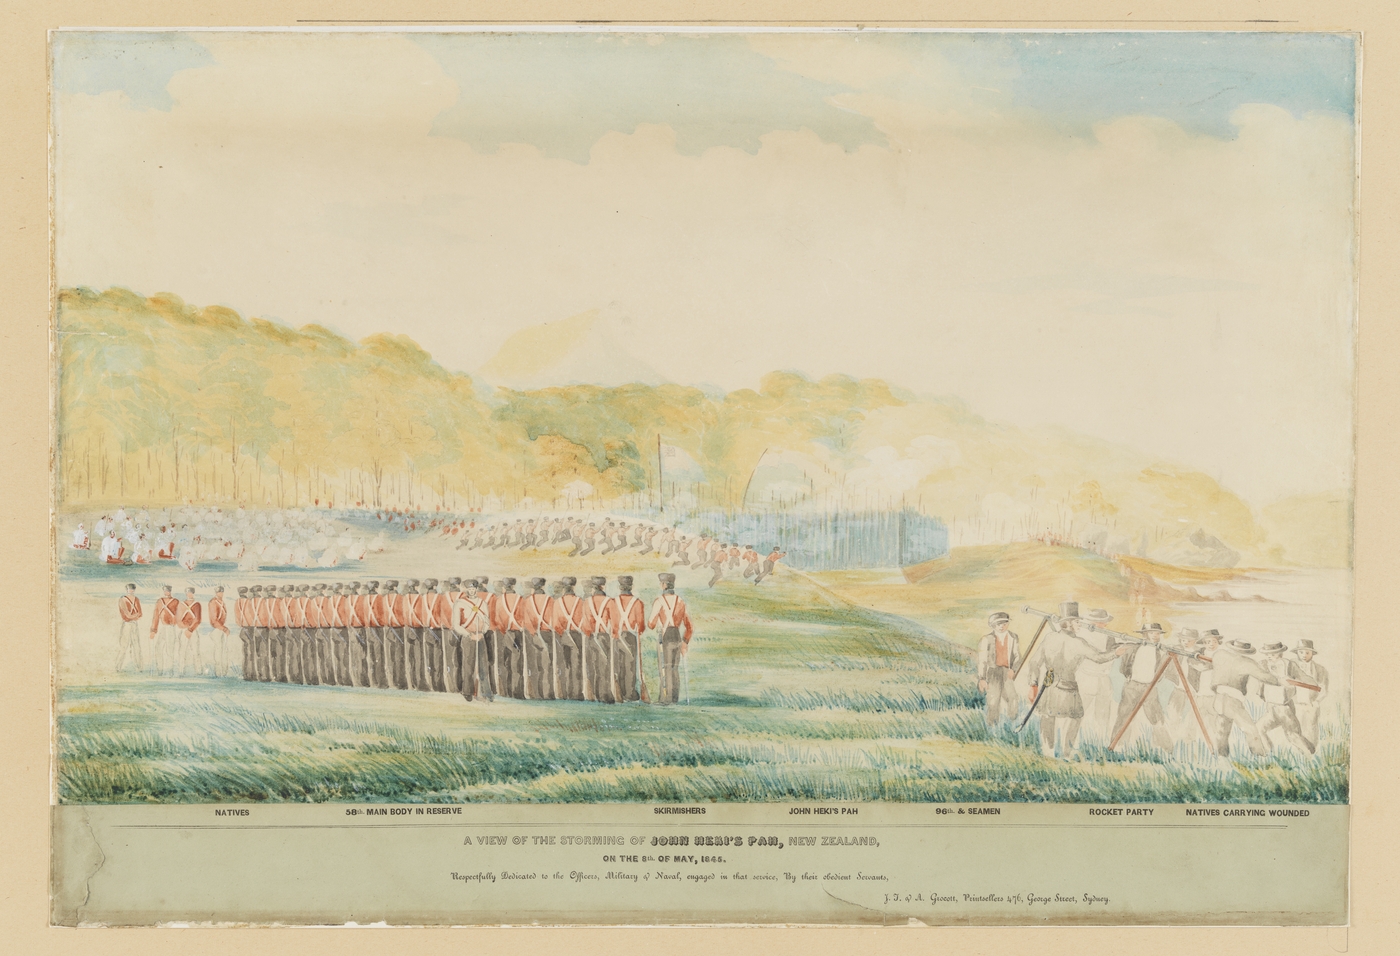 A view of the storming of John Heki's pah, New Zealand, on the 8th. of May 1845.